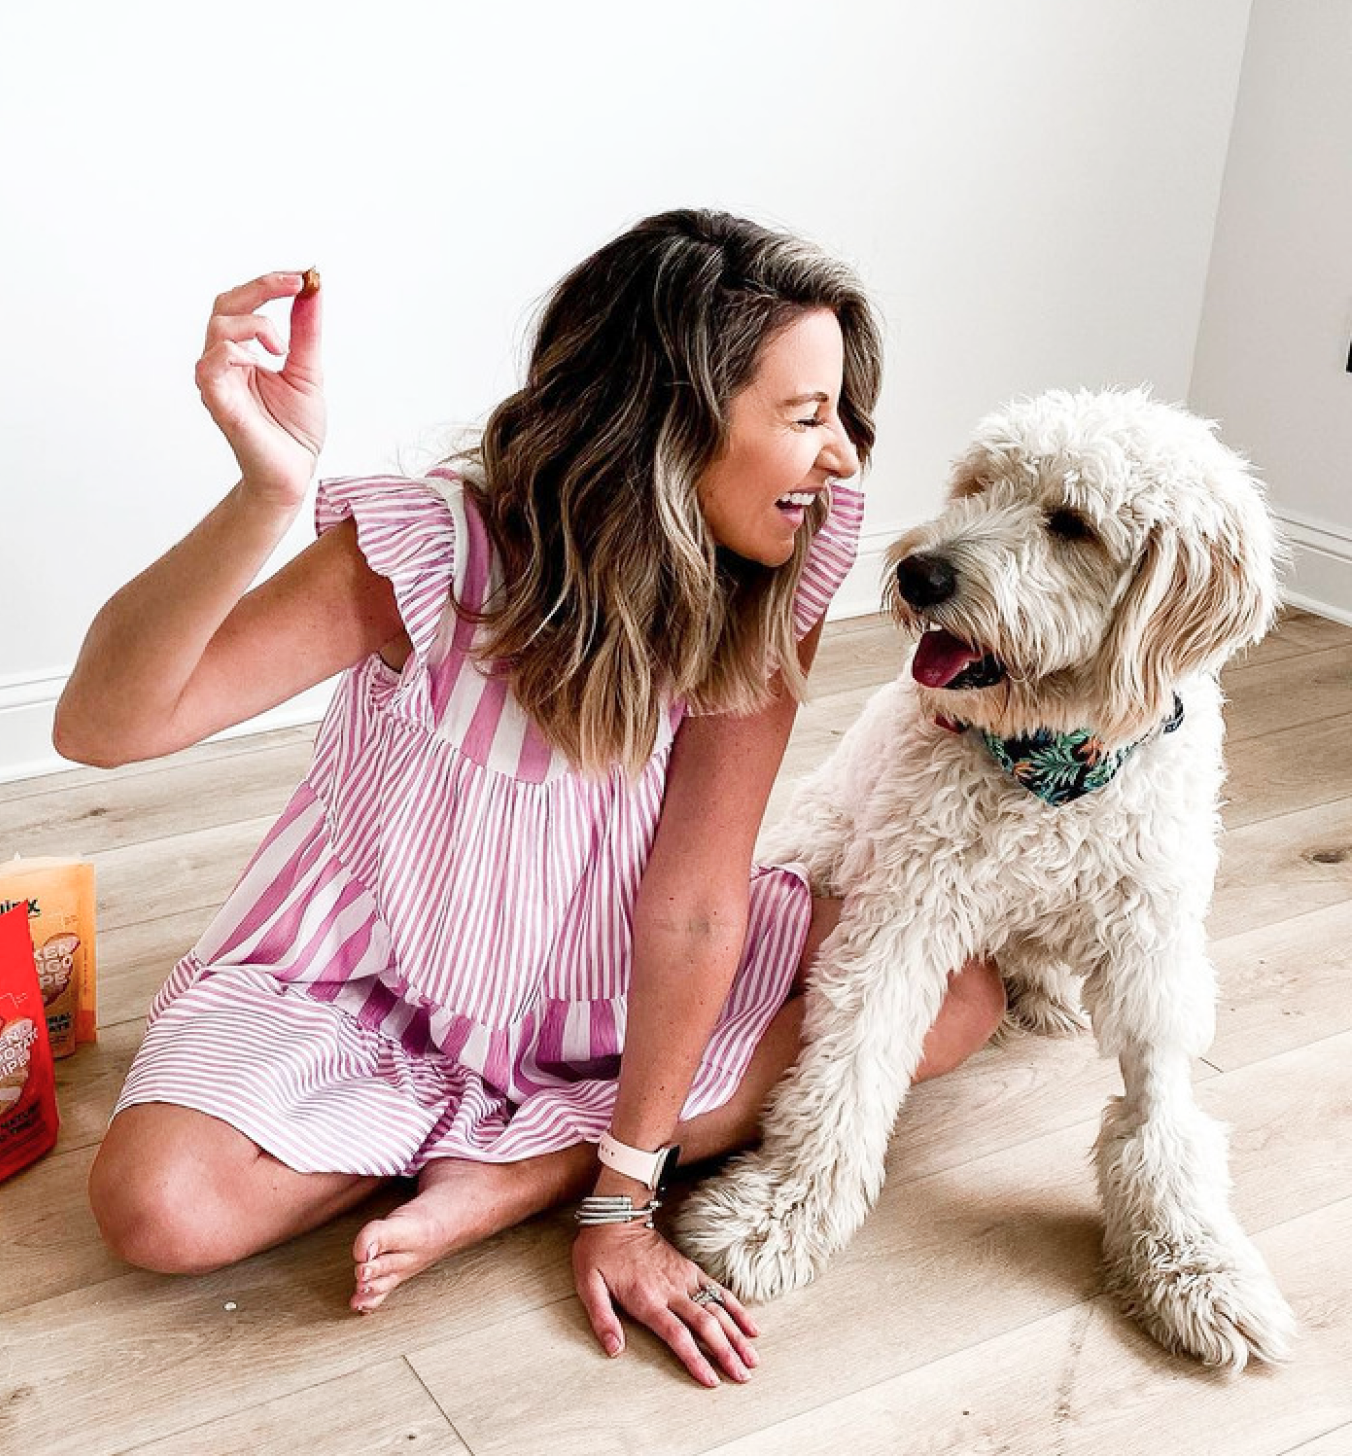 Woman playfully holding a treat away from a big dog next to her on the floor